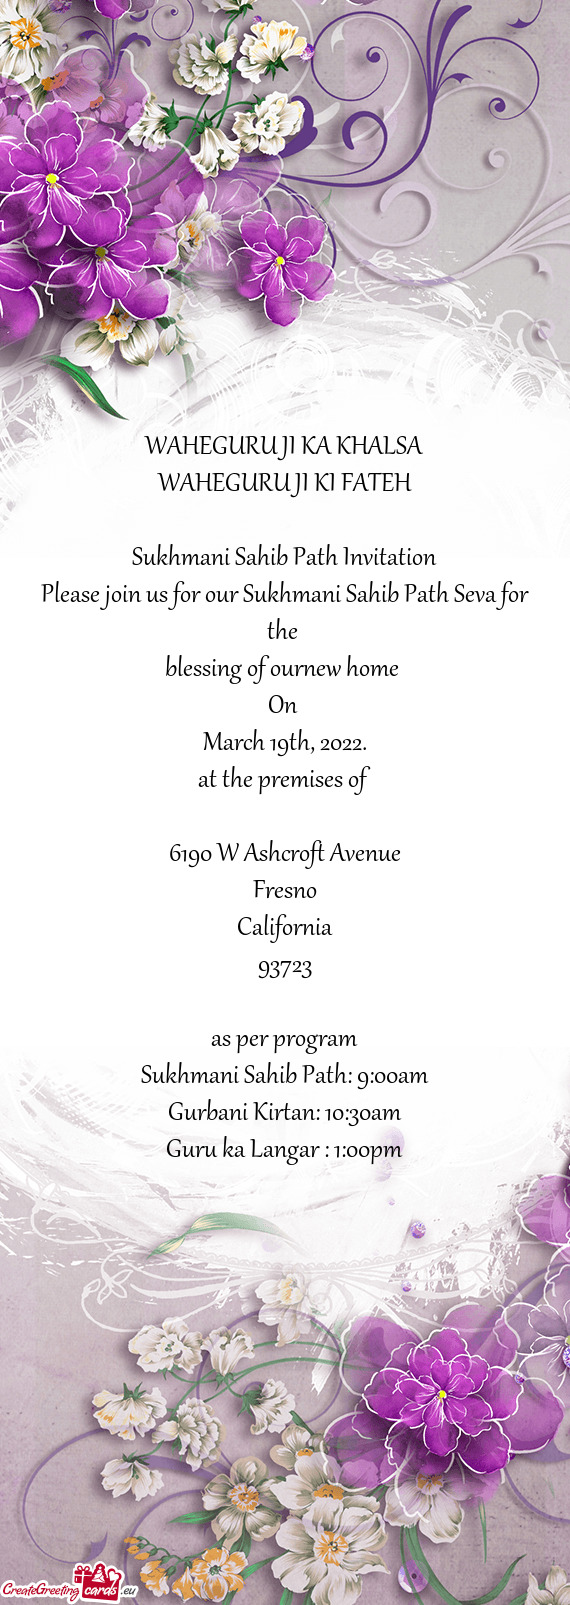 Please join us for our Sukhmani Sahib Path Seva for the